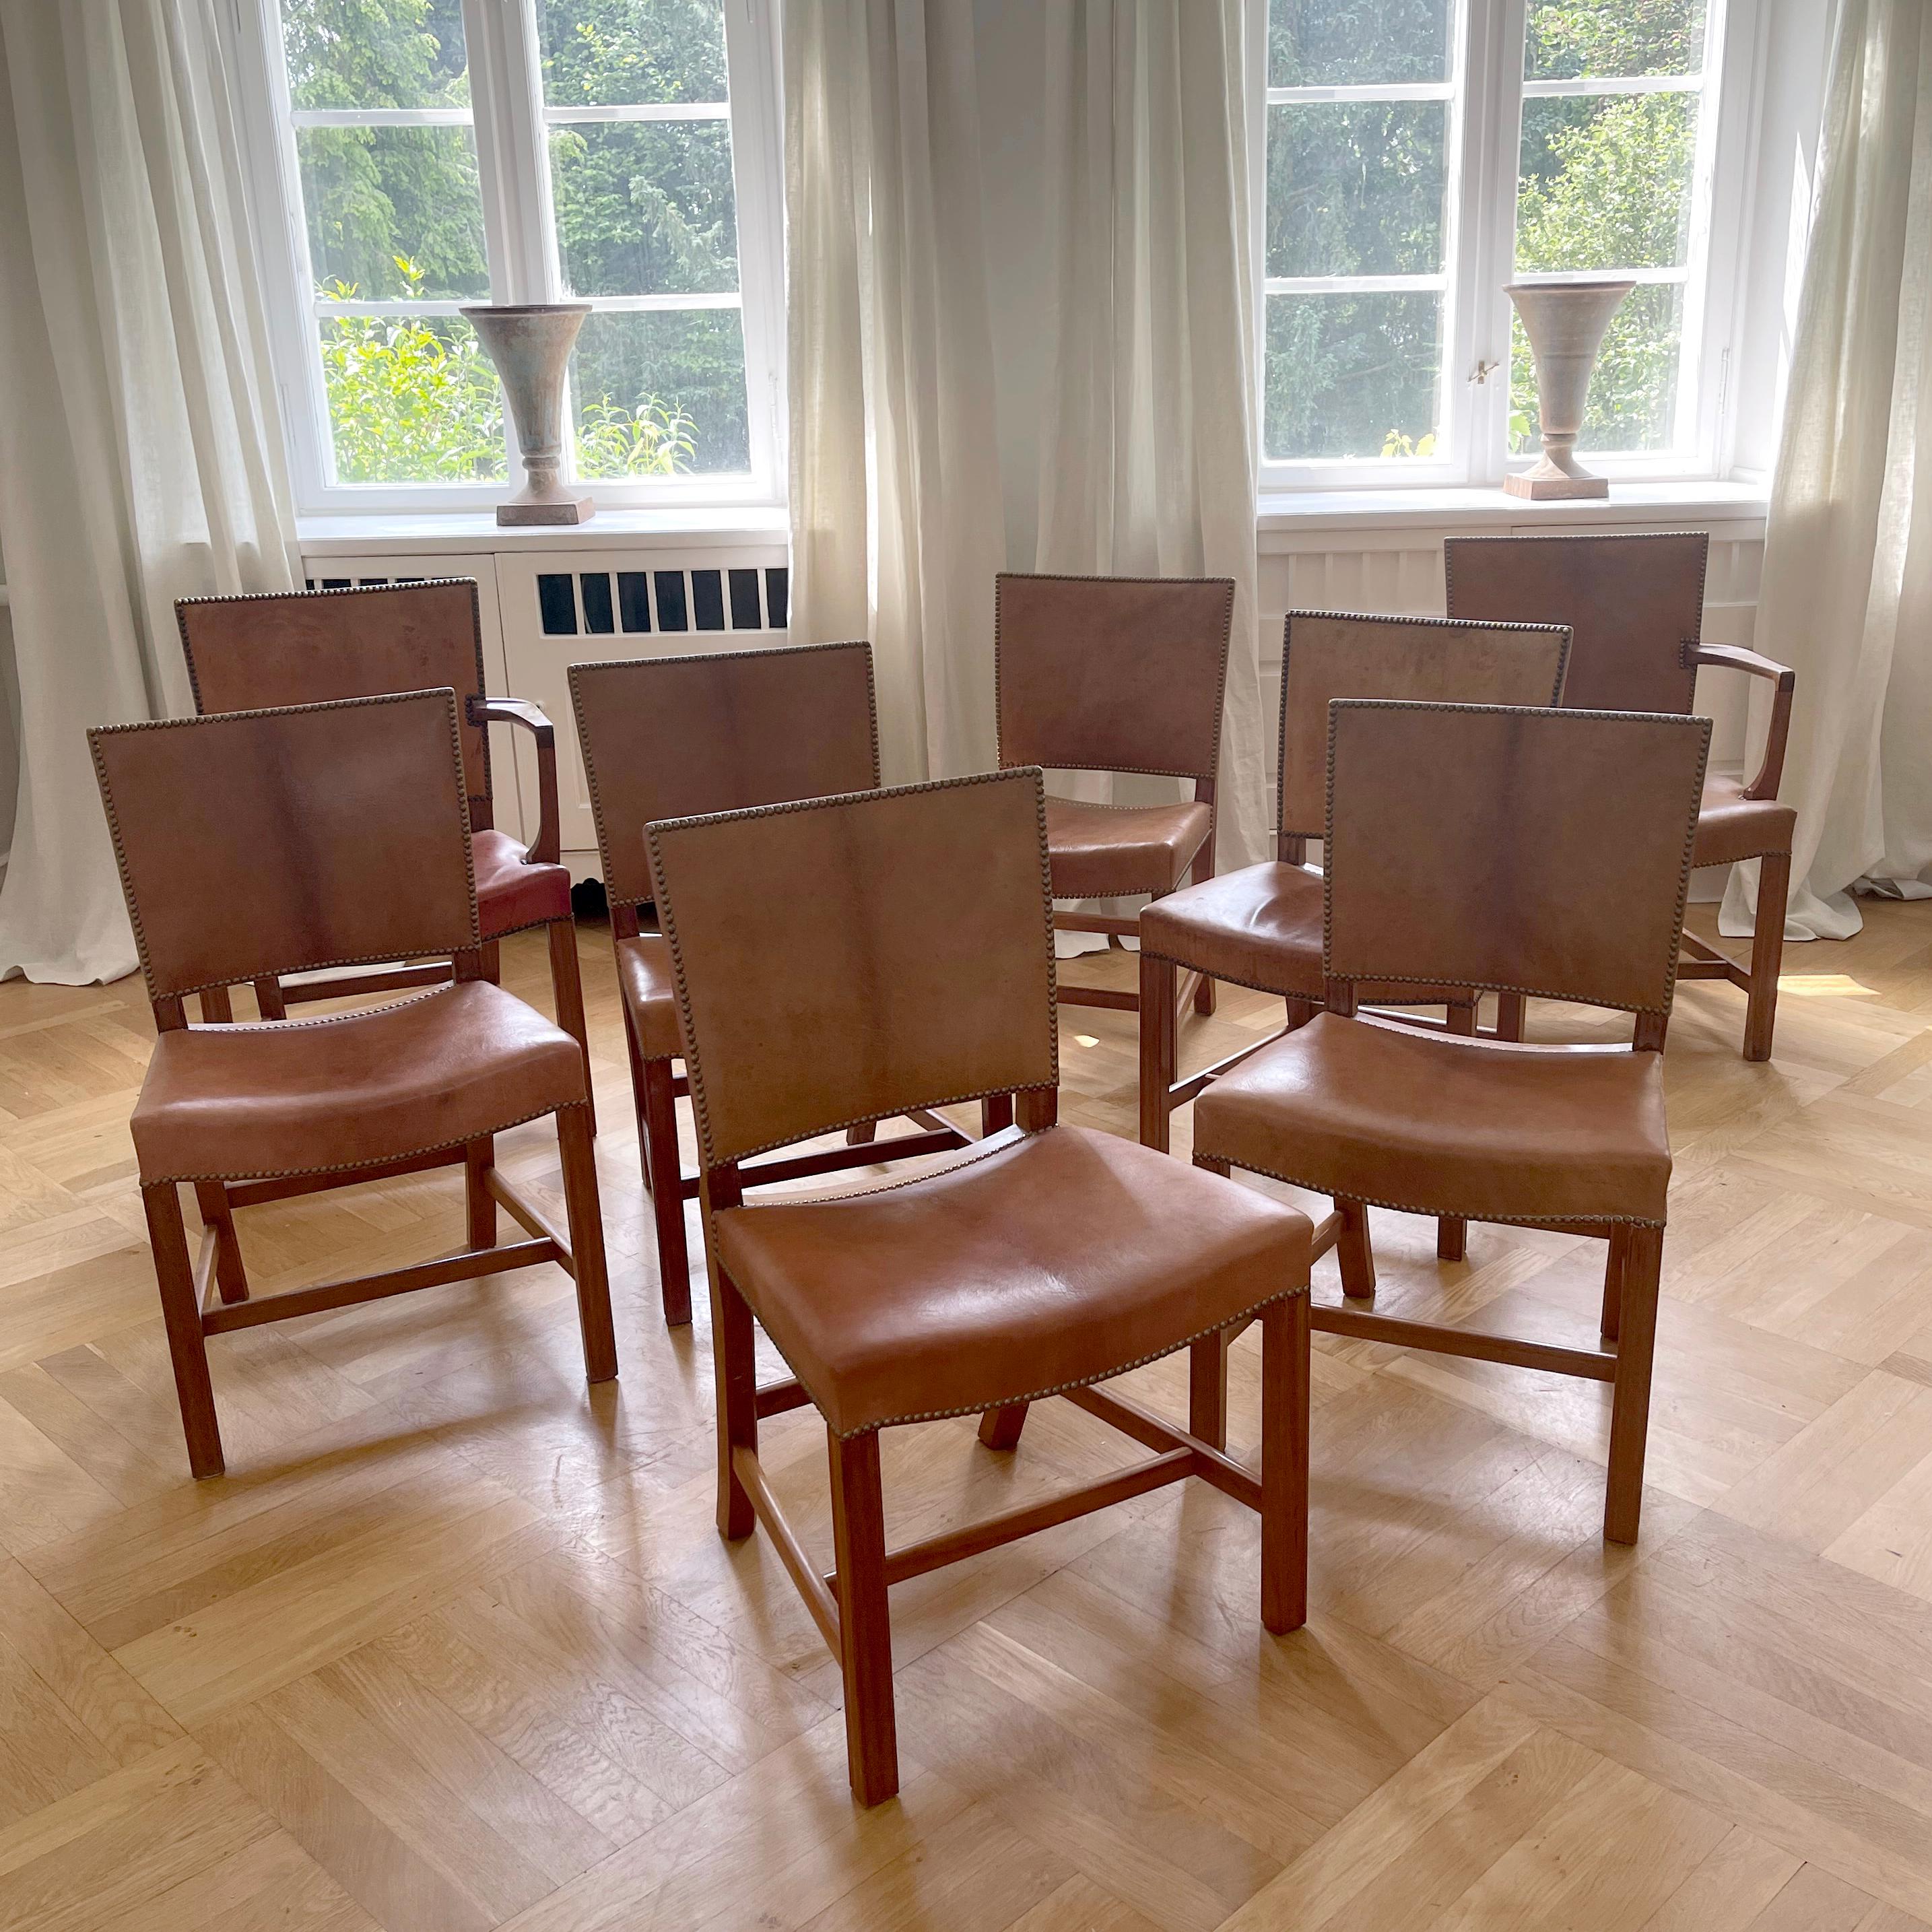 European Set of 8 Kaare Klint Red Chairs, Niger Leather, Mahogany